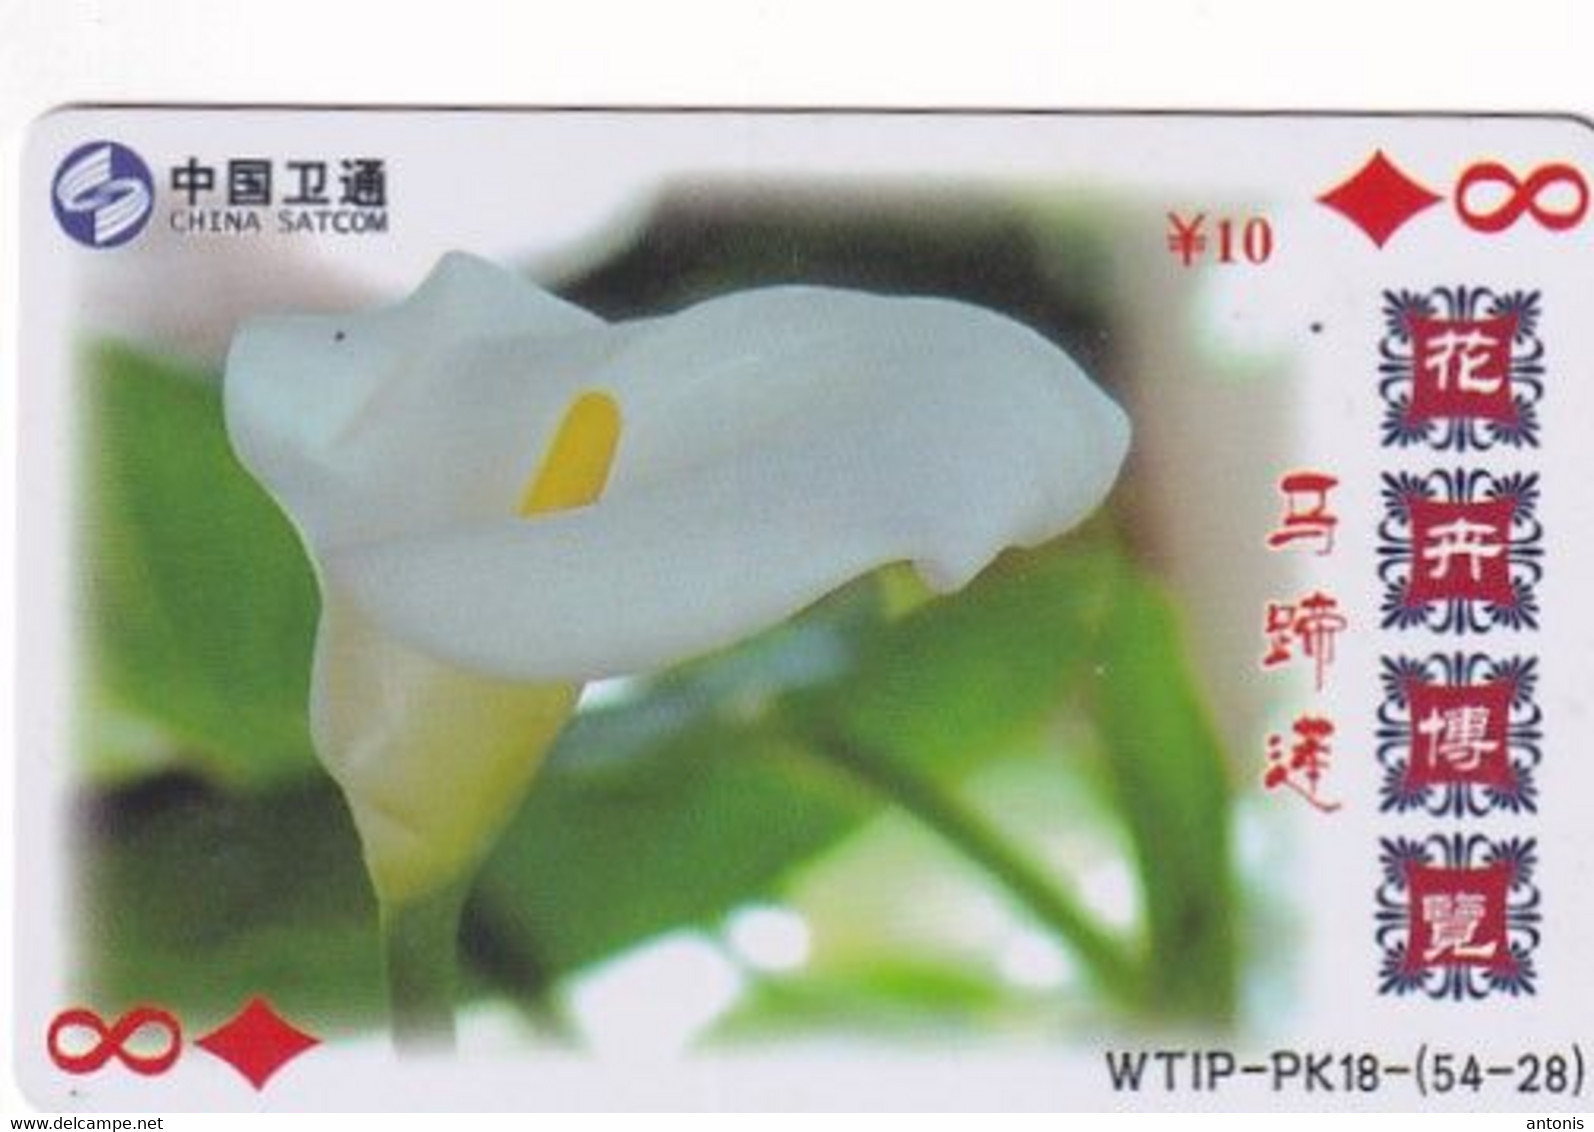 CHINA - Flowers, Playing Cards, China Satcom Prepaid Card Y10, Exp.date 20/09/08, Used - Blumen